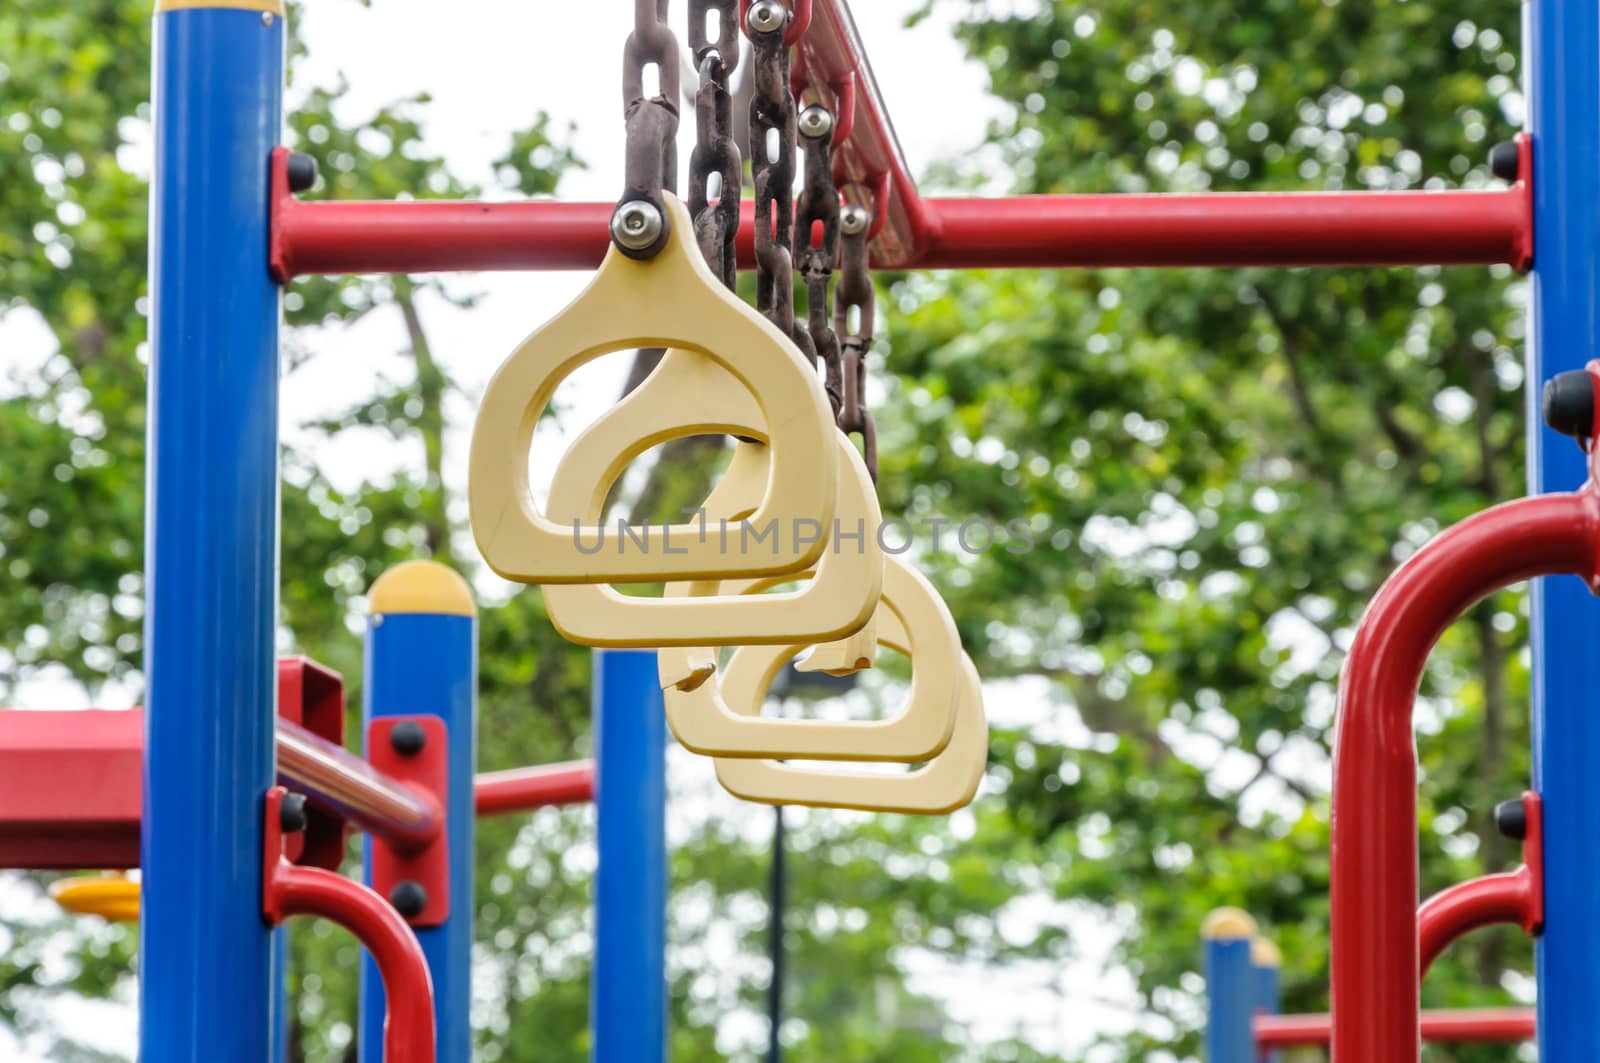 Climbing rings at a playground by NuwatPhoto